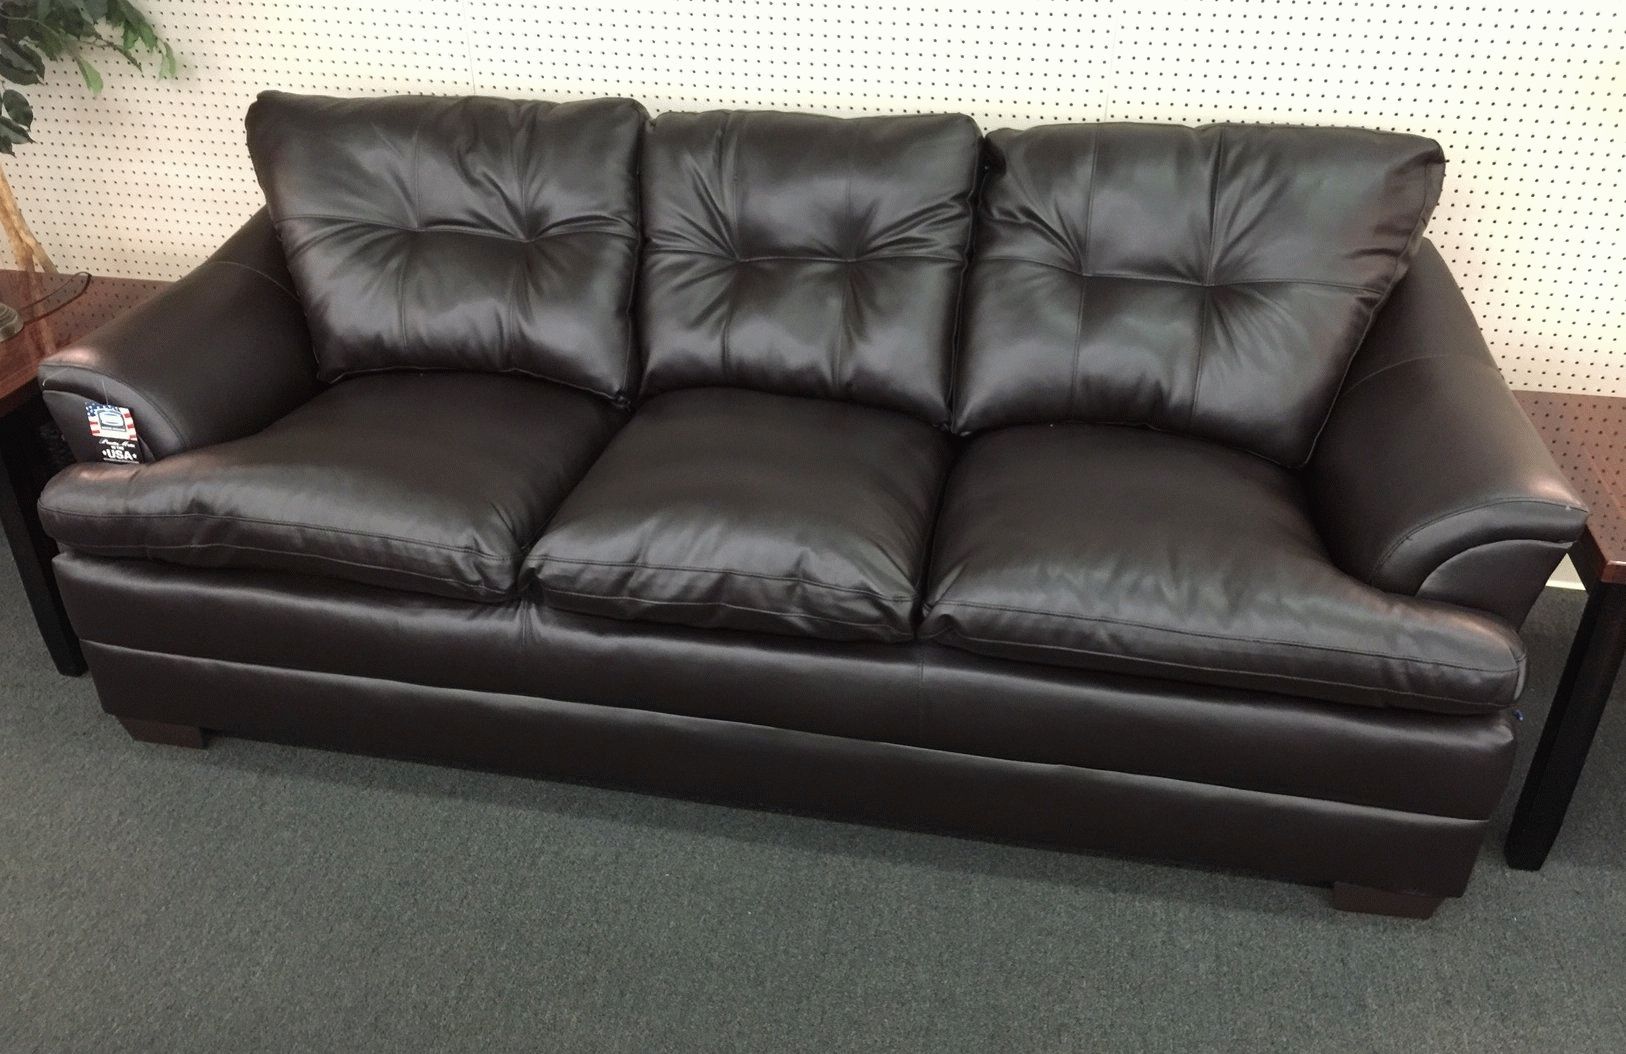 Apollo Espresso Sofasimmons At Furniture Warehouse | The $399 With Simmons Sofas And Loveseats (View 20 of 20)